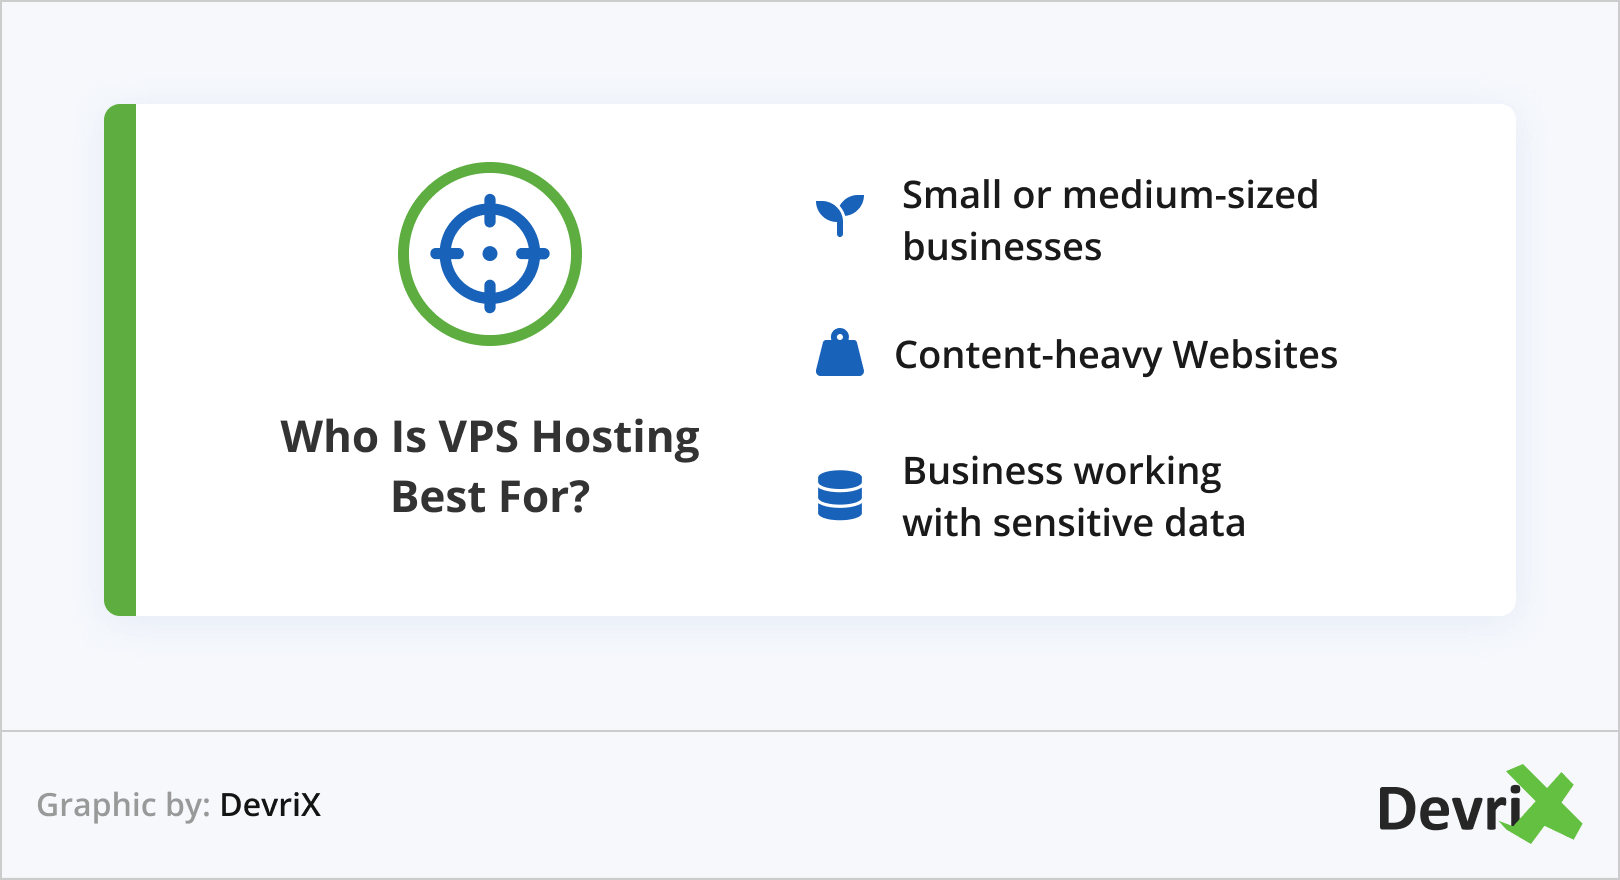 6. Who is VPS hosting best for